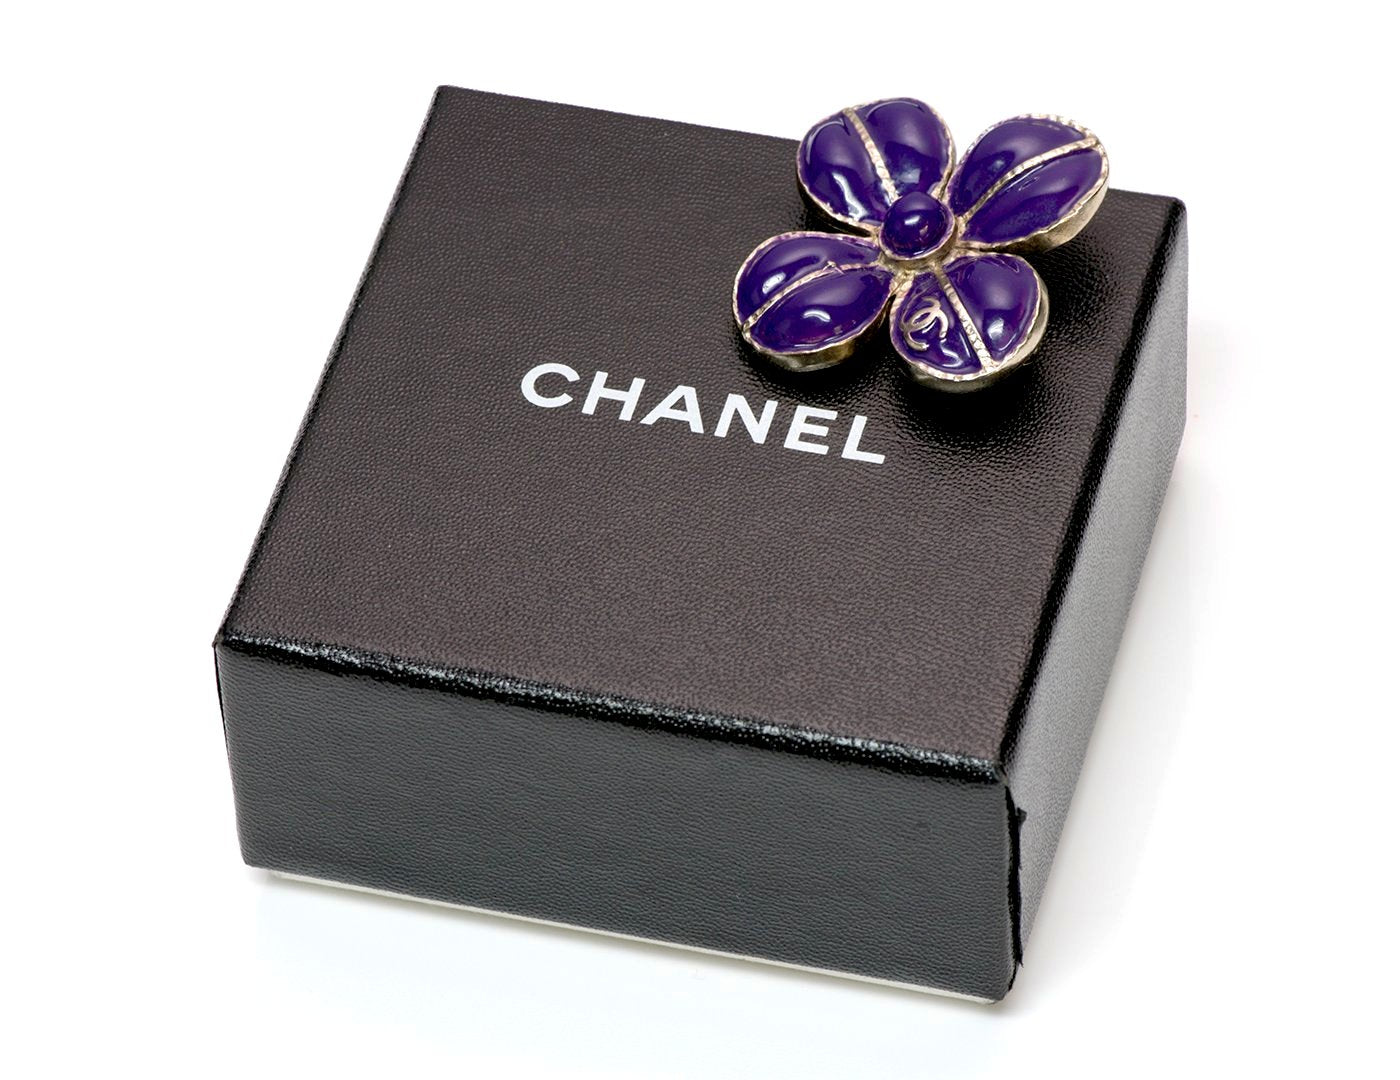 Chanel Maison Gripoix Glass Camellia Flower Brooch - DSF Antique Jewelry